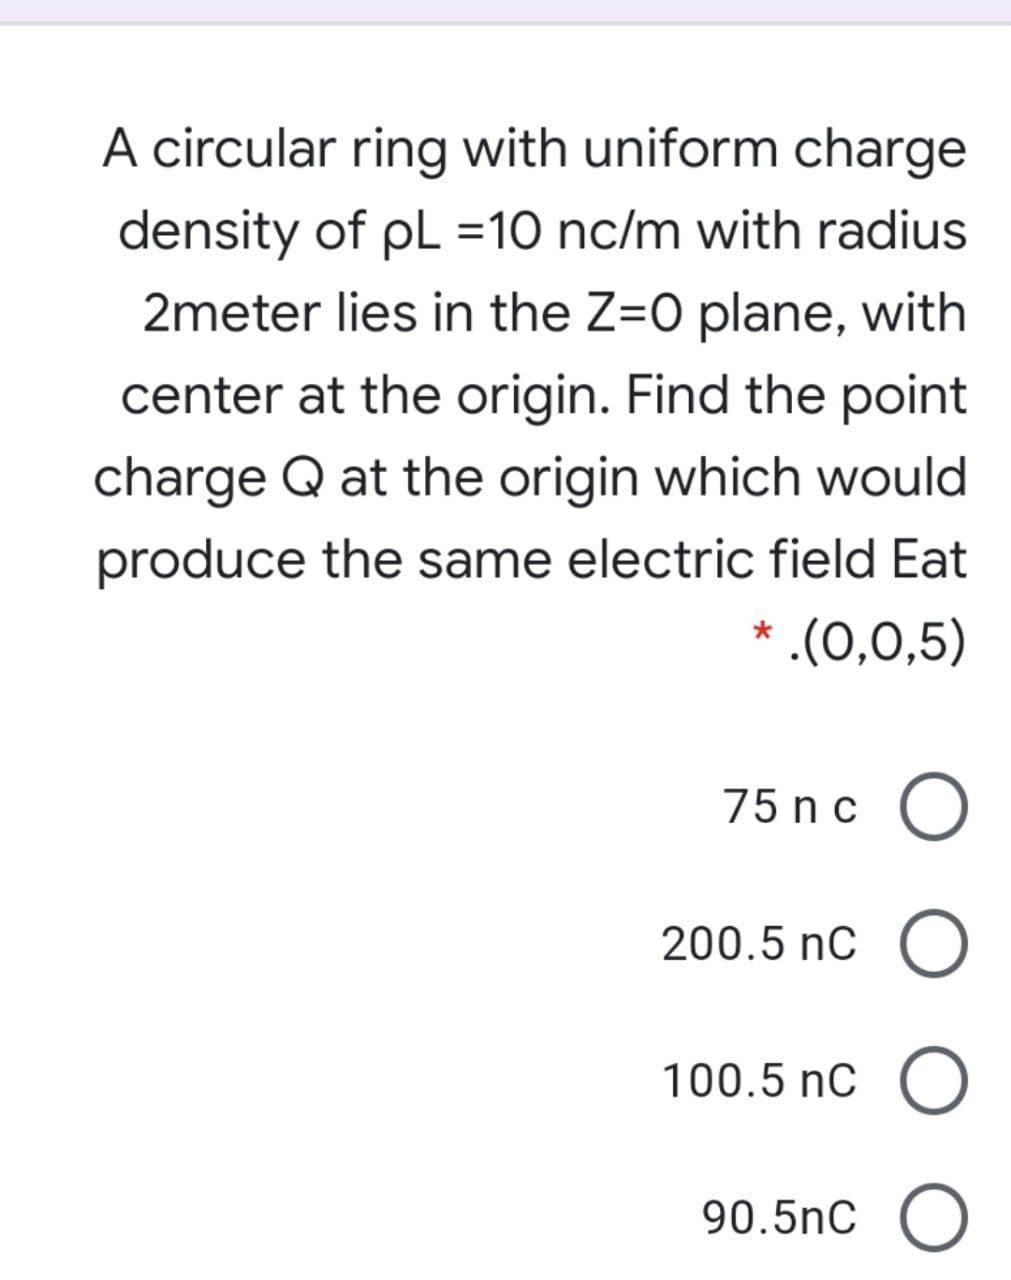 A circular ring with uniform charge
density of pL =10 nc/m with radius
2meter lies in the Z=0 plane, with
center at the origin. Find the point
charge Q at the origin which would
produce the same electric field Eat
* .(0,0,5)
75 nc O
200.5 nC O
100.5 nC
90.5nC
